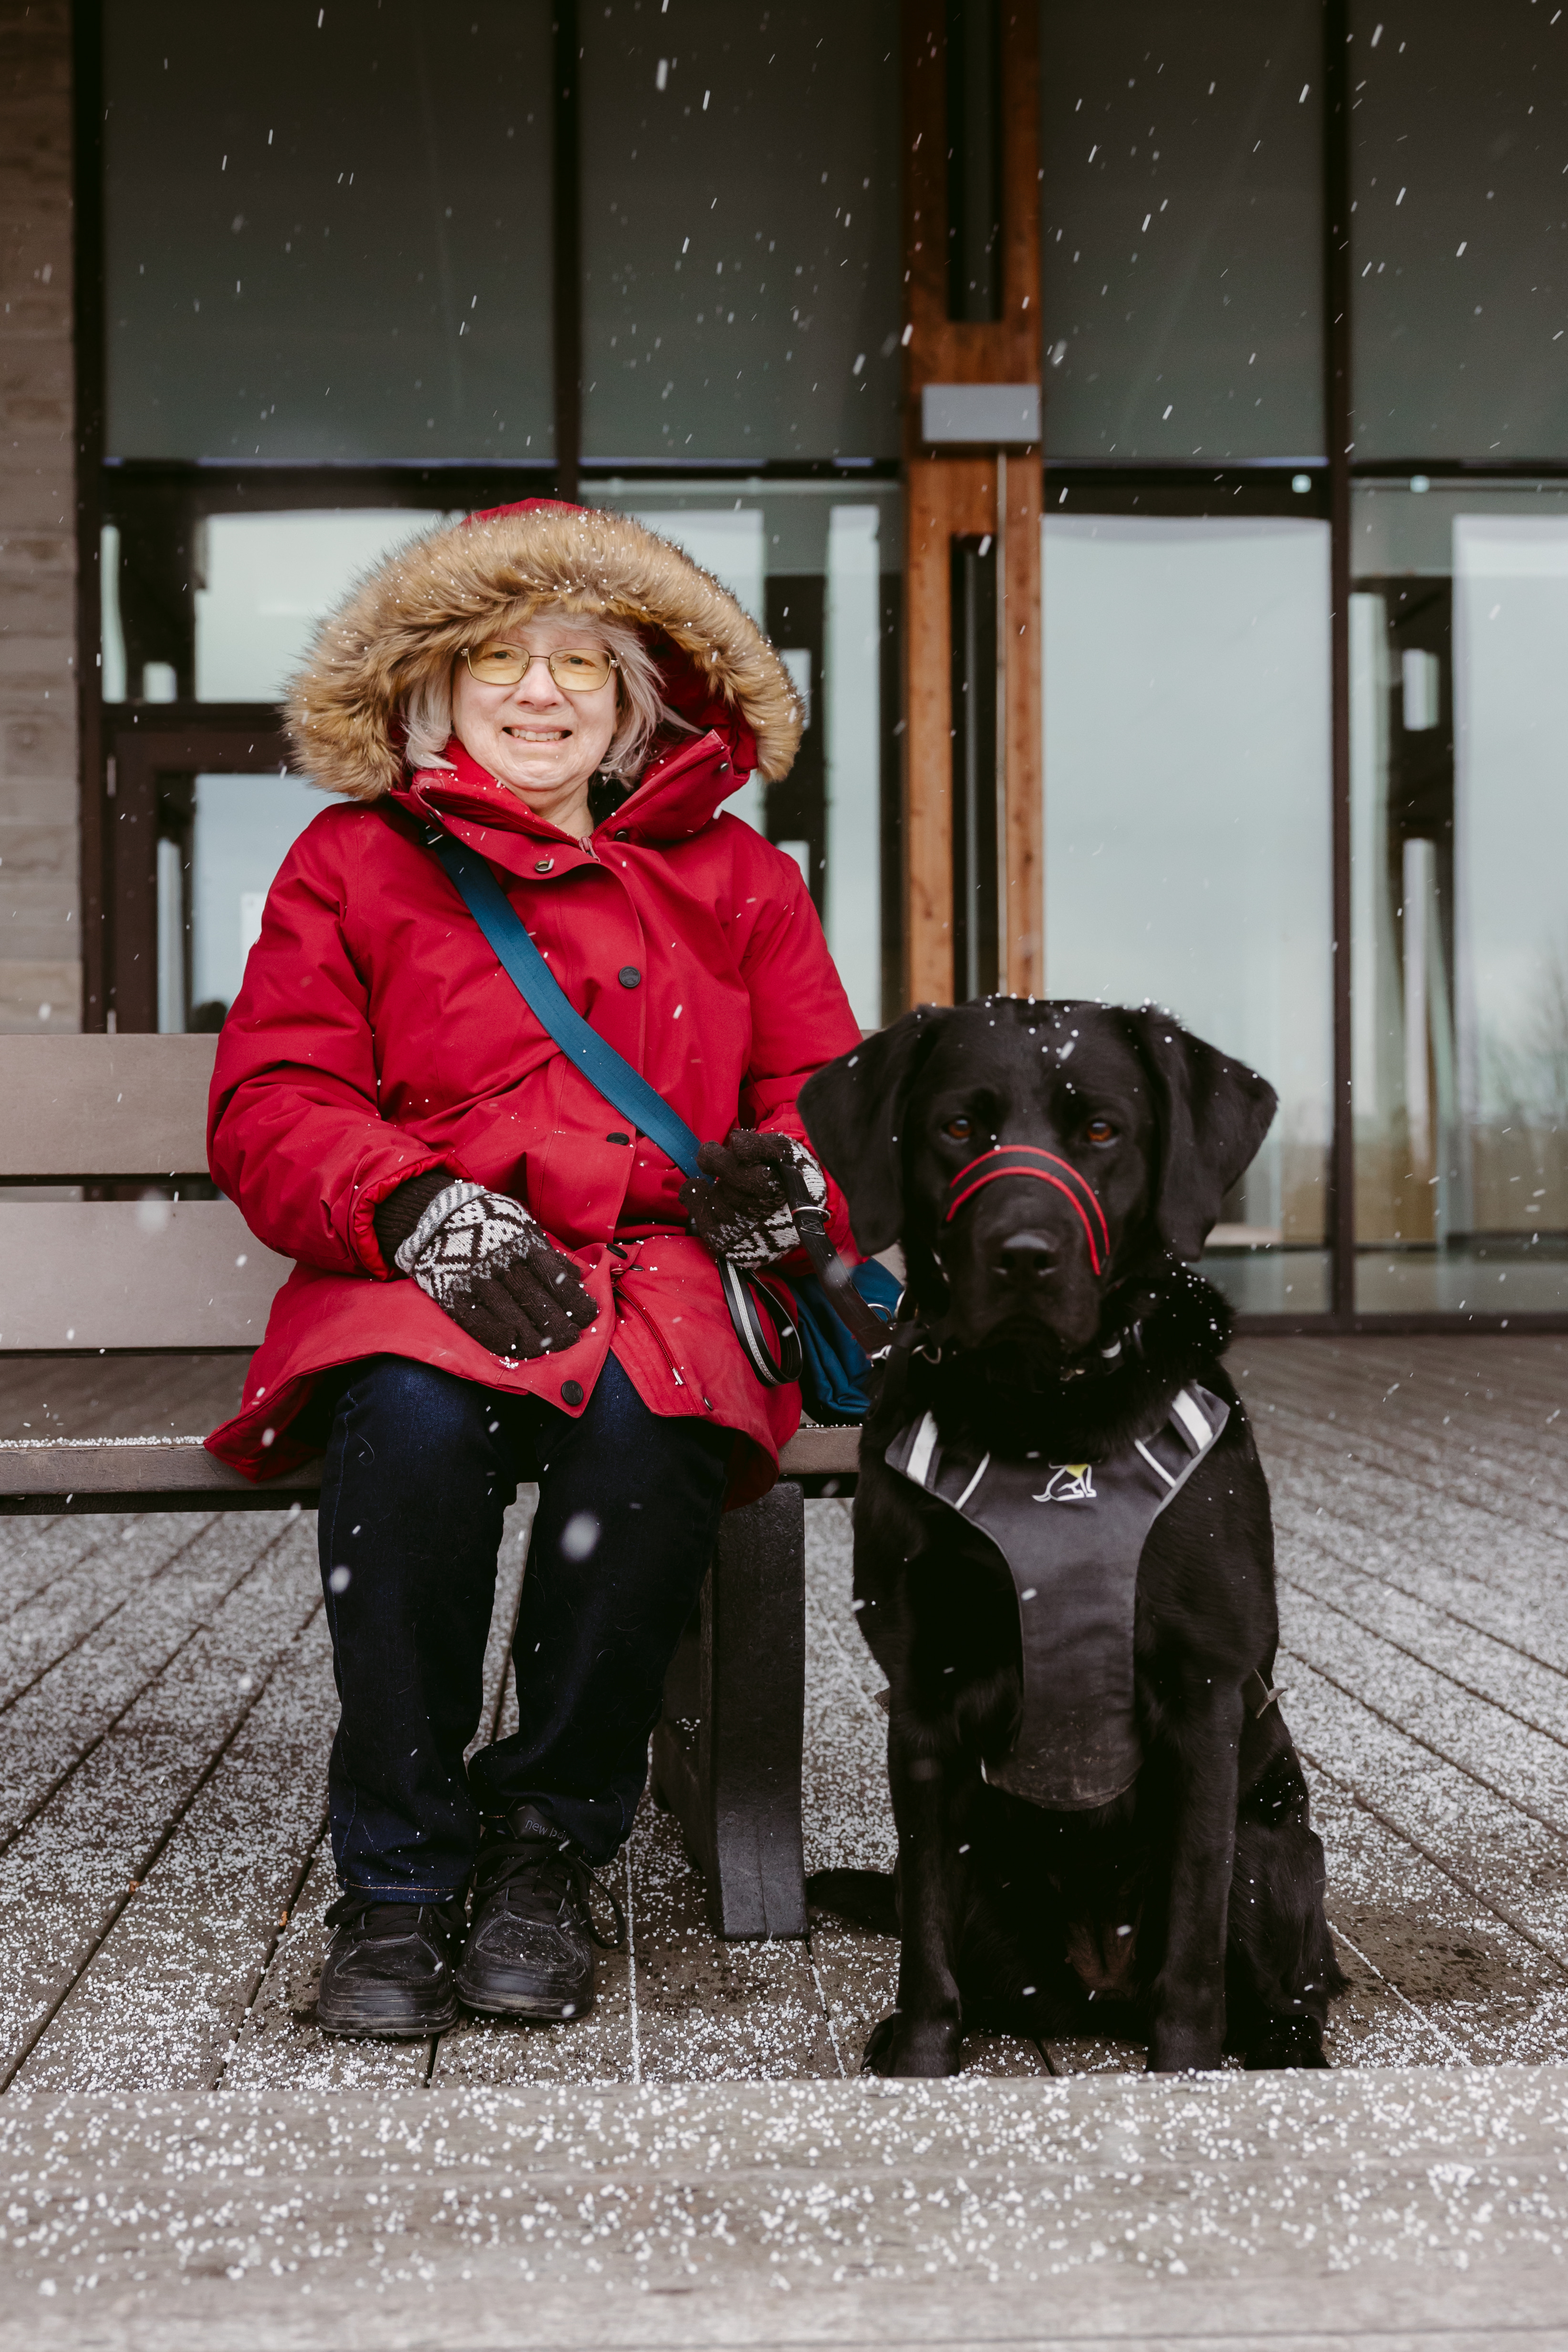 Cheri smiles and sits on a bench, and her guide dog, Sassy, sits on the pavement to her right. Sassy is a black dog in harness. It’s lightly snowing, and Cheri is wearing a red winter jacket and gloves.